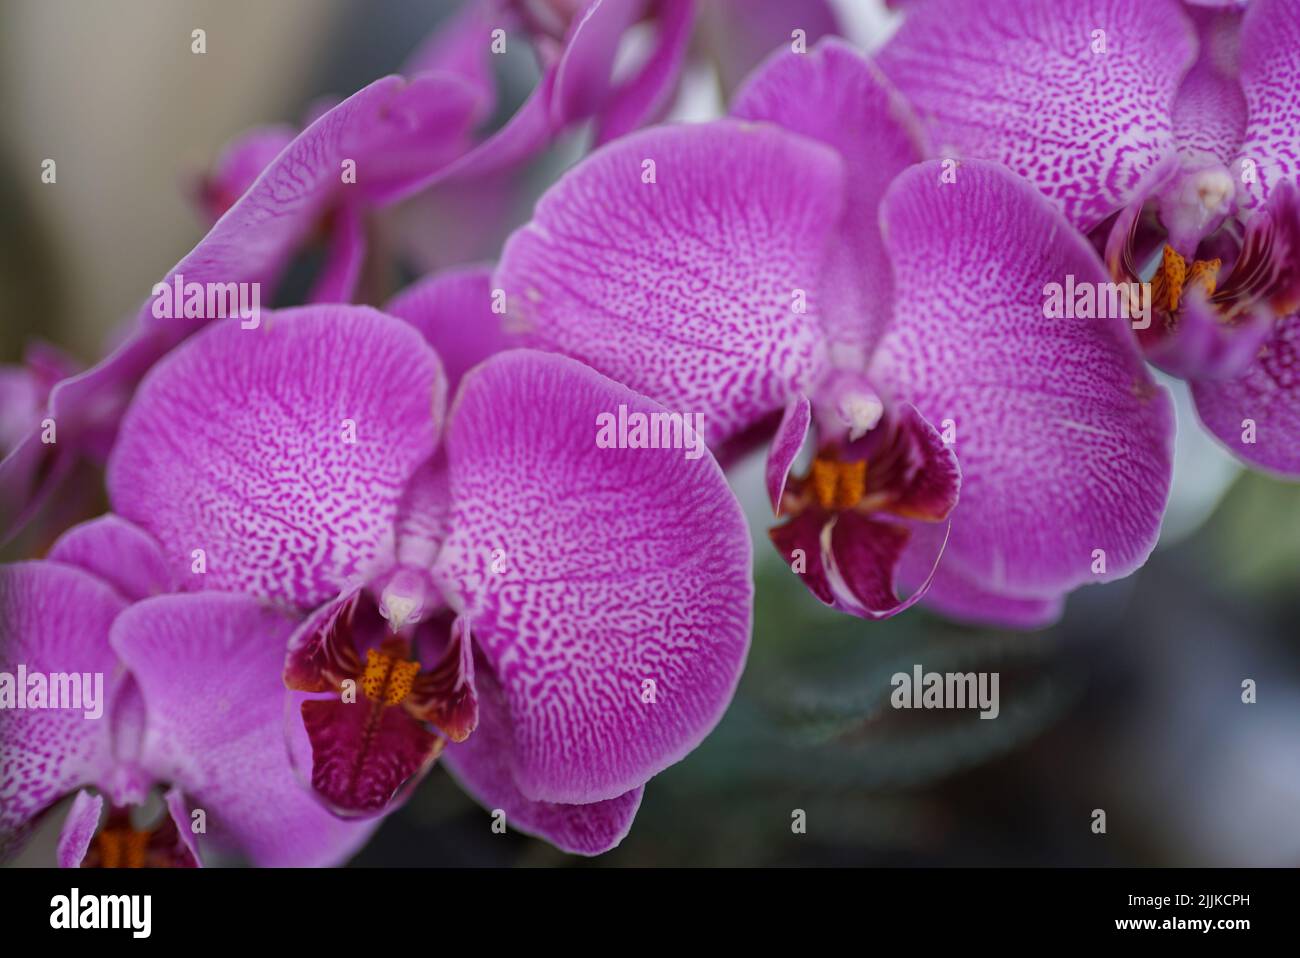 The Two purple striped Phalaenopsis (moth) orchid flowers Stock Photo